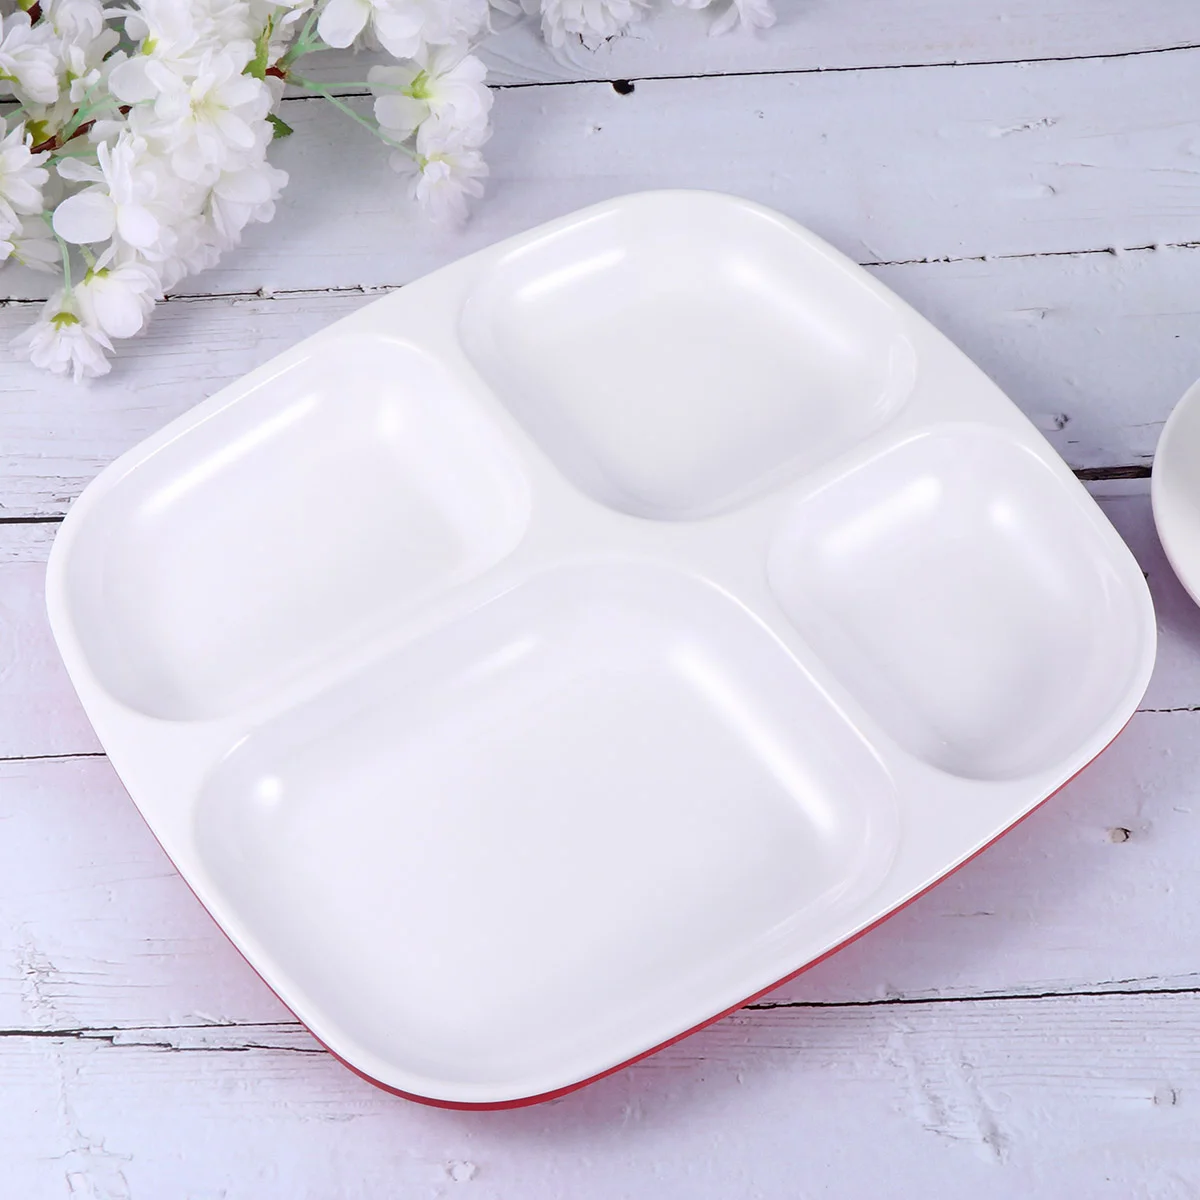 

Plates Plate Divided Tray Serving Dish Dinner Compartment Control Portion Diet Planning Plastic Kids Lunch Ceramic Meal Dishes